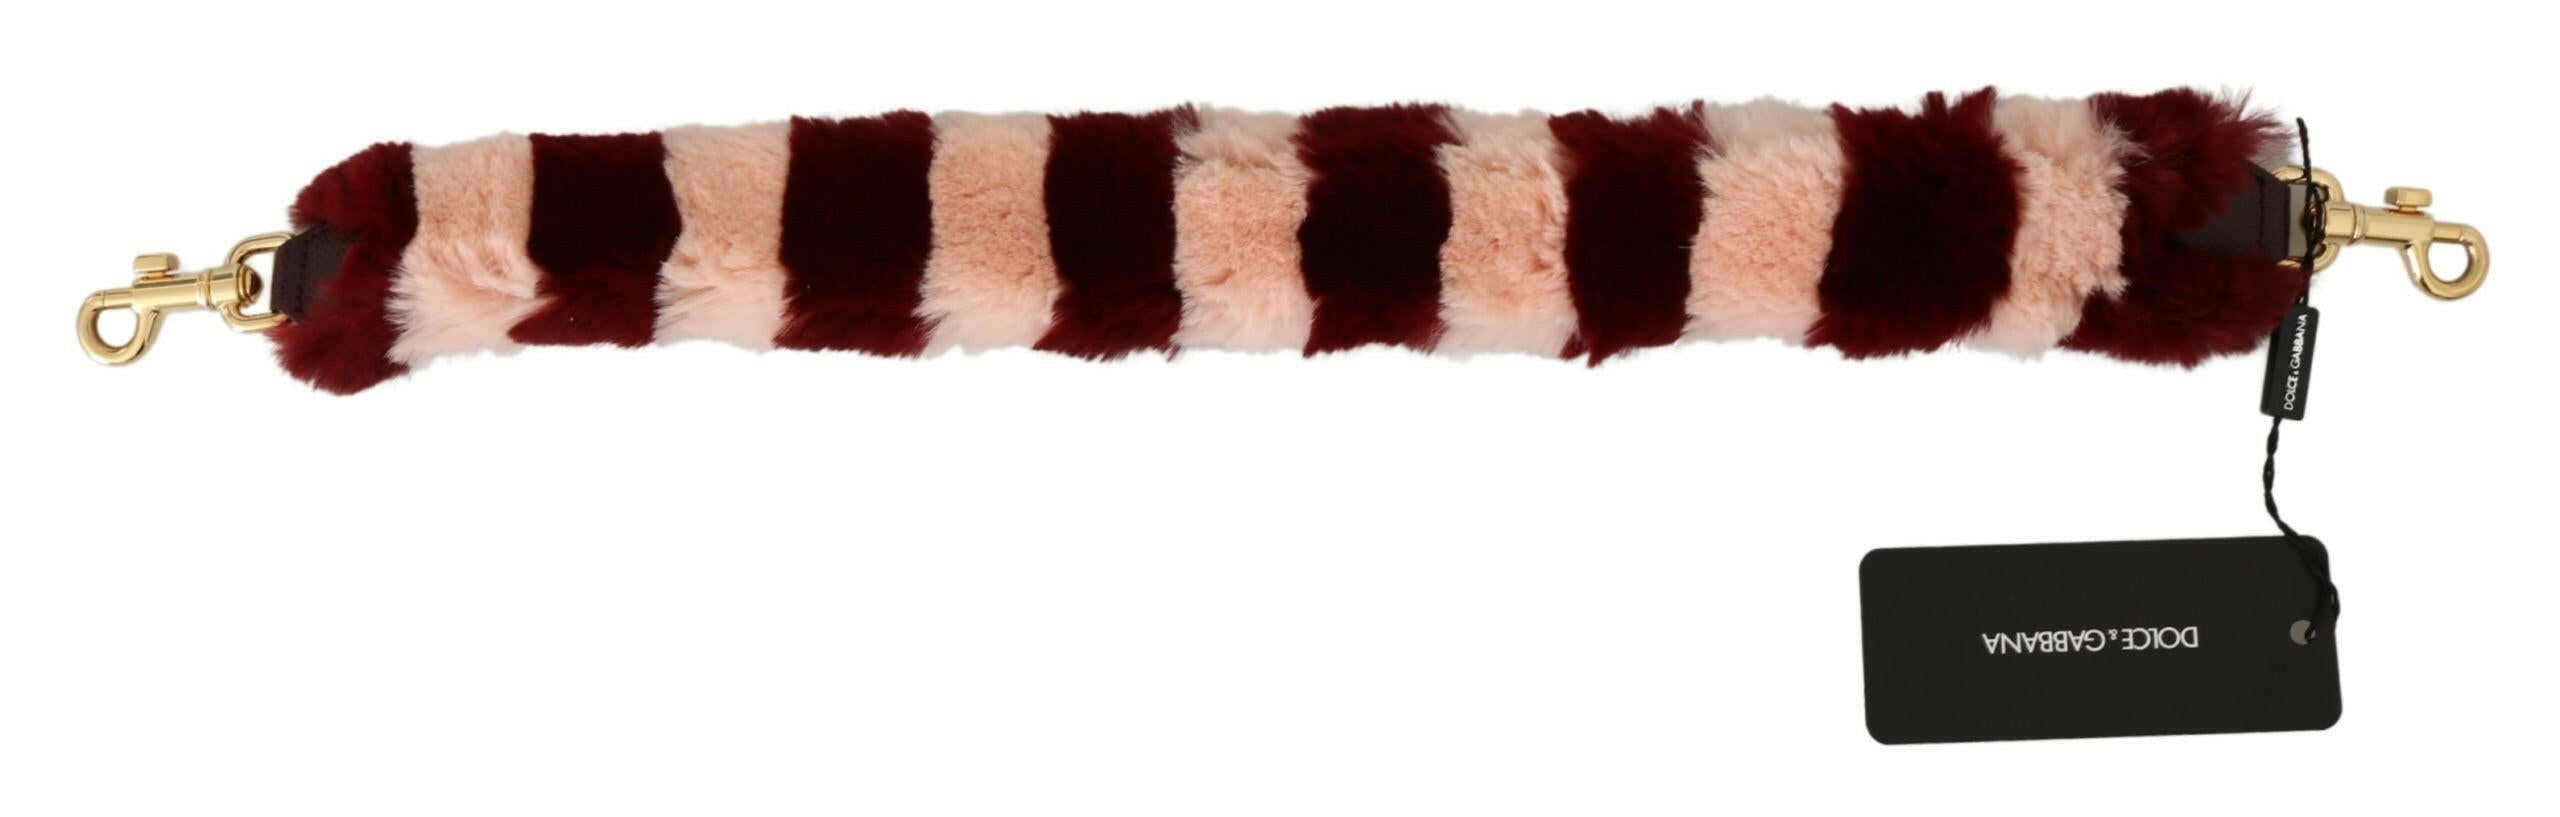 Dolce & Gabbana Pink Red Lapin Fur Accessory Shoulder Strap - GENUINE AUTHENTIC BRAND LLC  